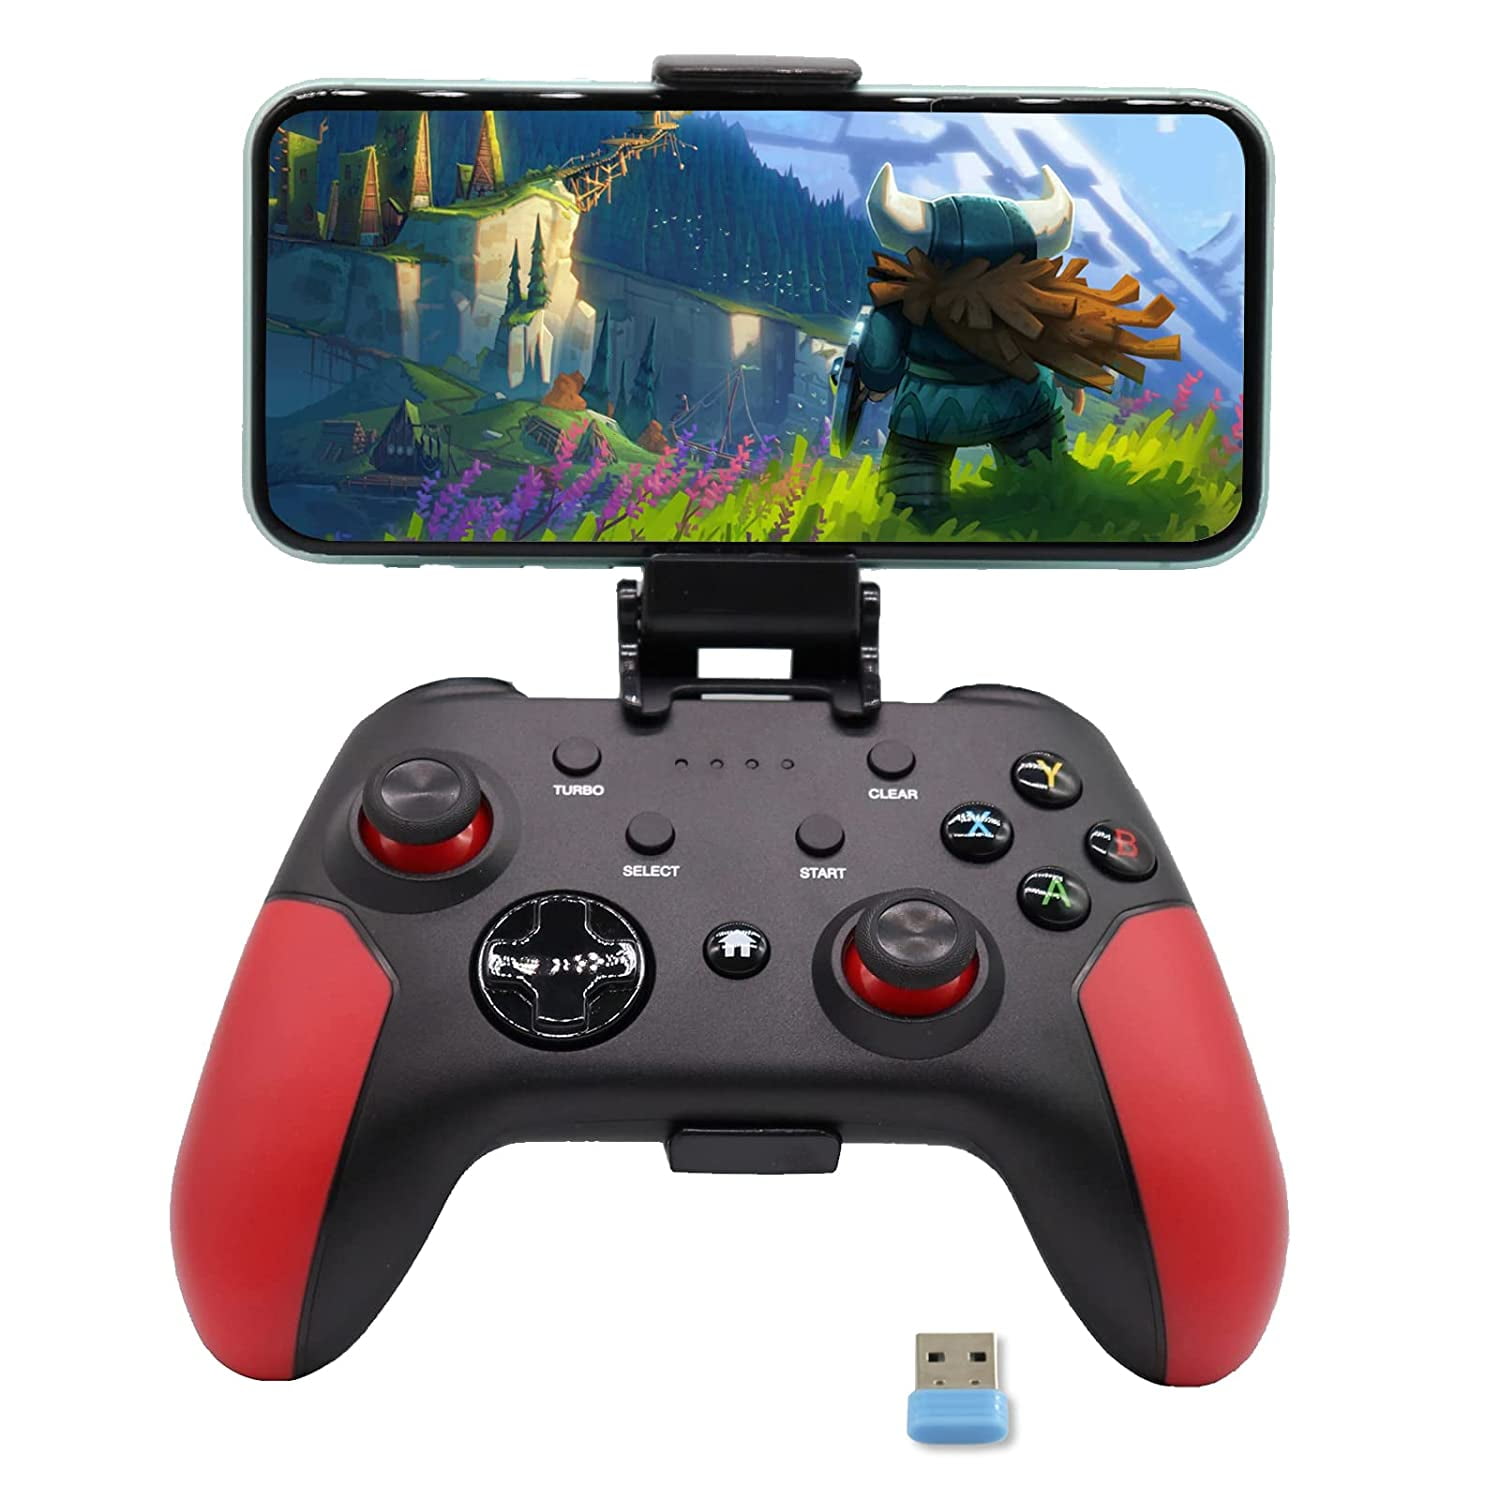 Mobile Phone Bluetooth Gamepad Joystick Controller,Dual Shock and Xbox Gaming Controllers for iPhone/Android/PC/Mac/Switch,USB Wireless Receiver,Turbo,Dual Vibration Walmart.com